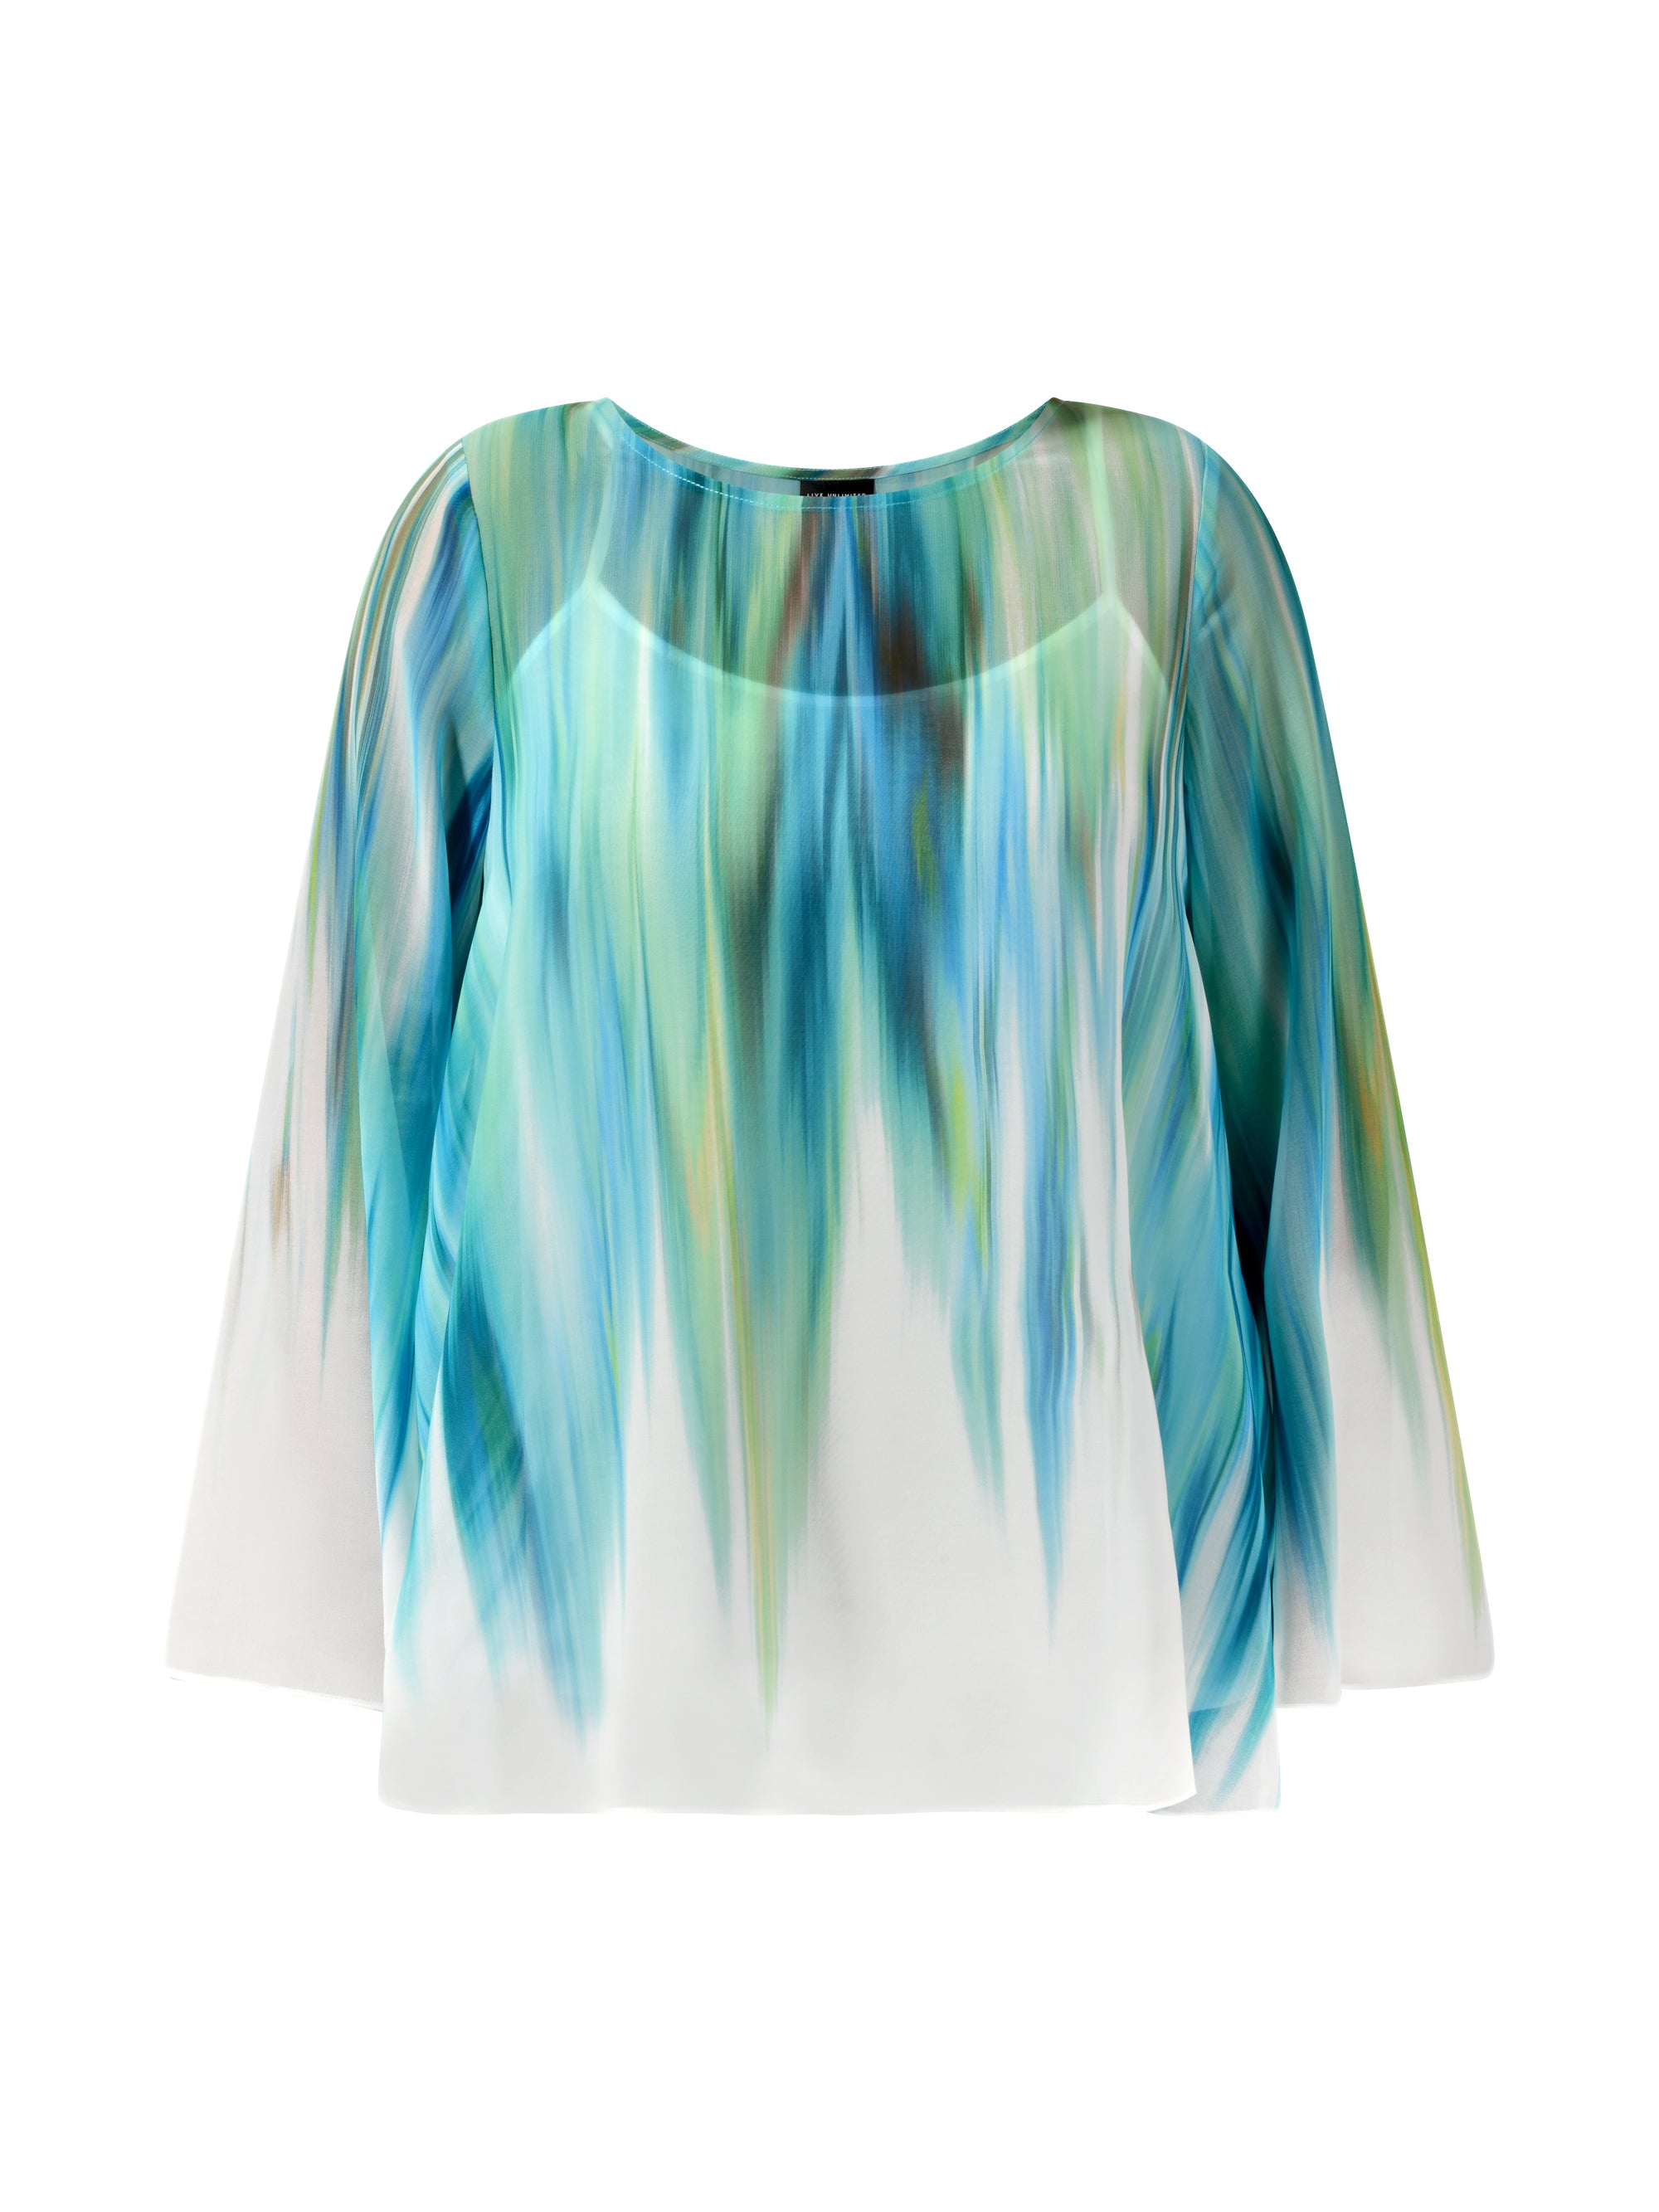 Blue Ombre High Low Chiffon Blouse